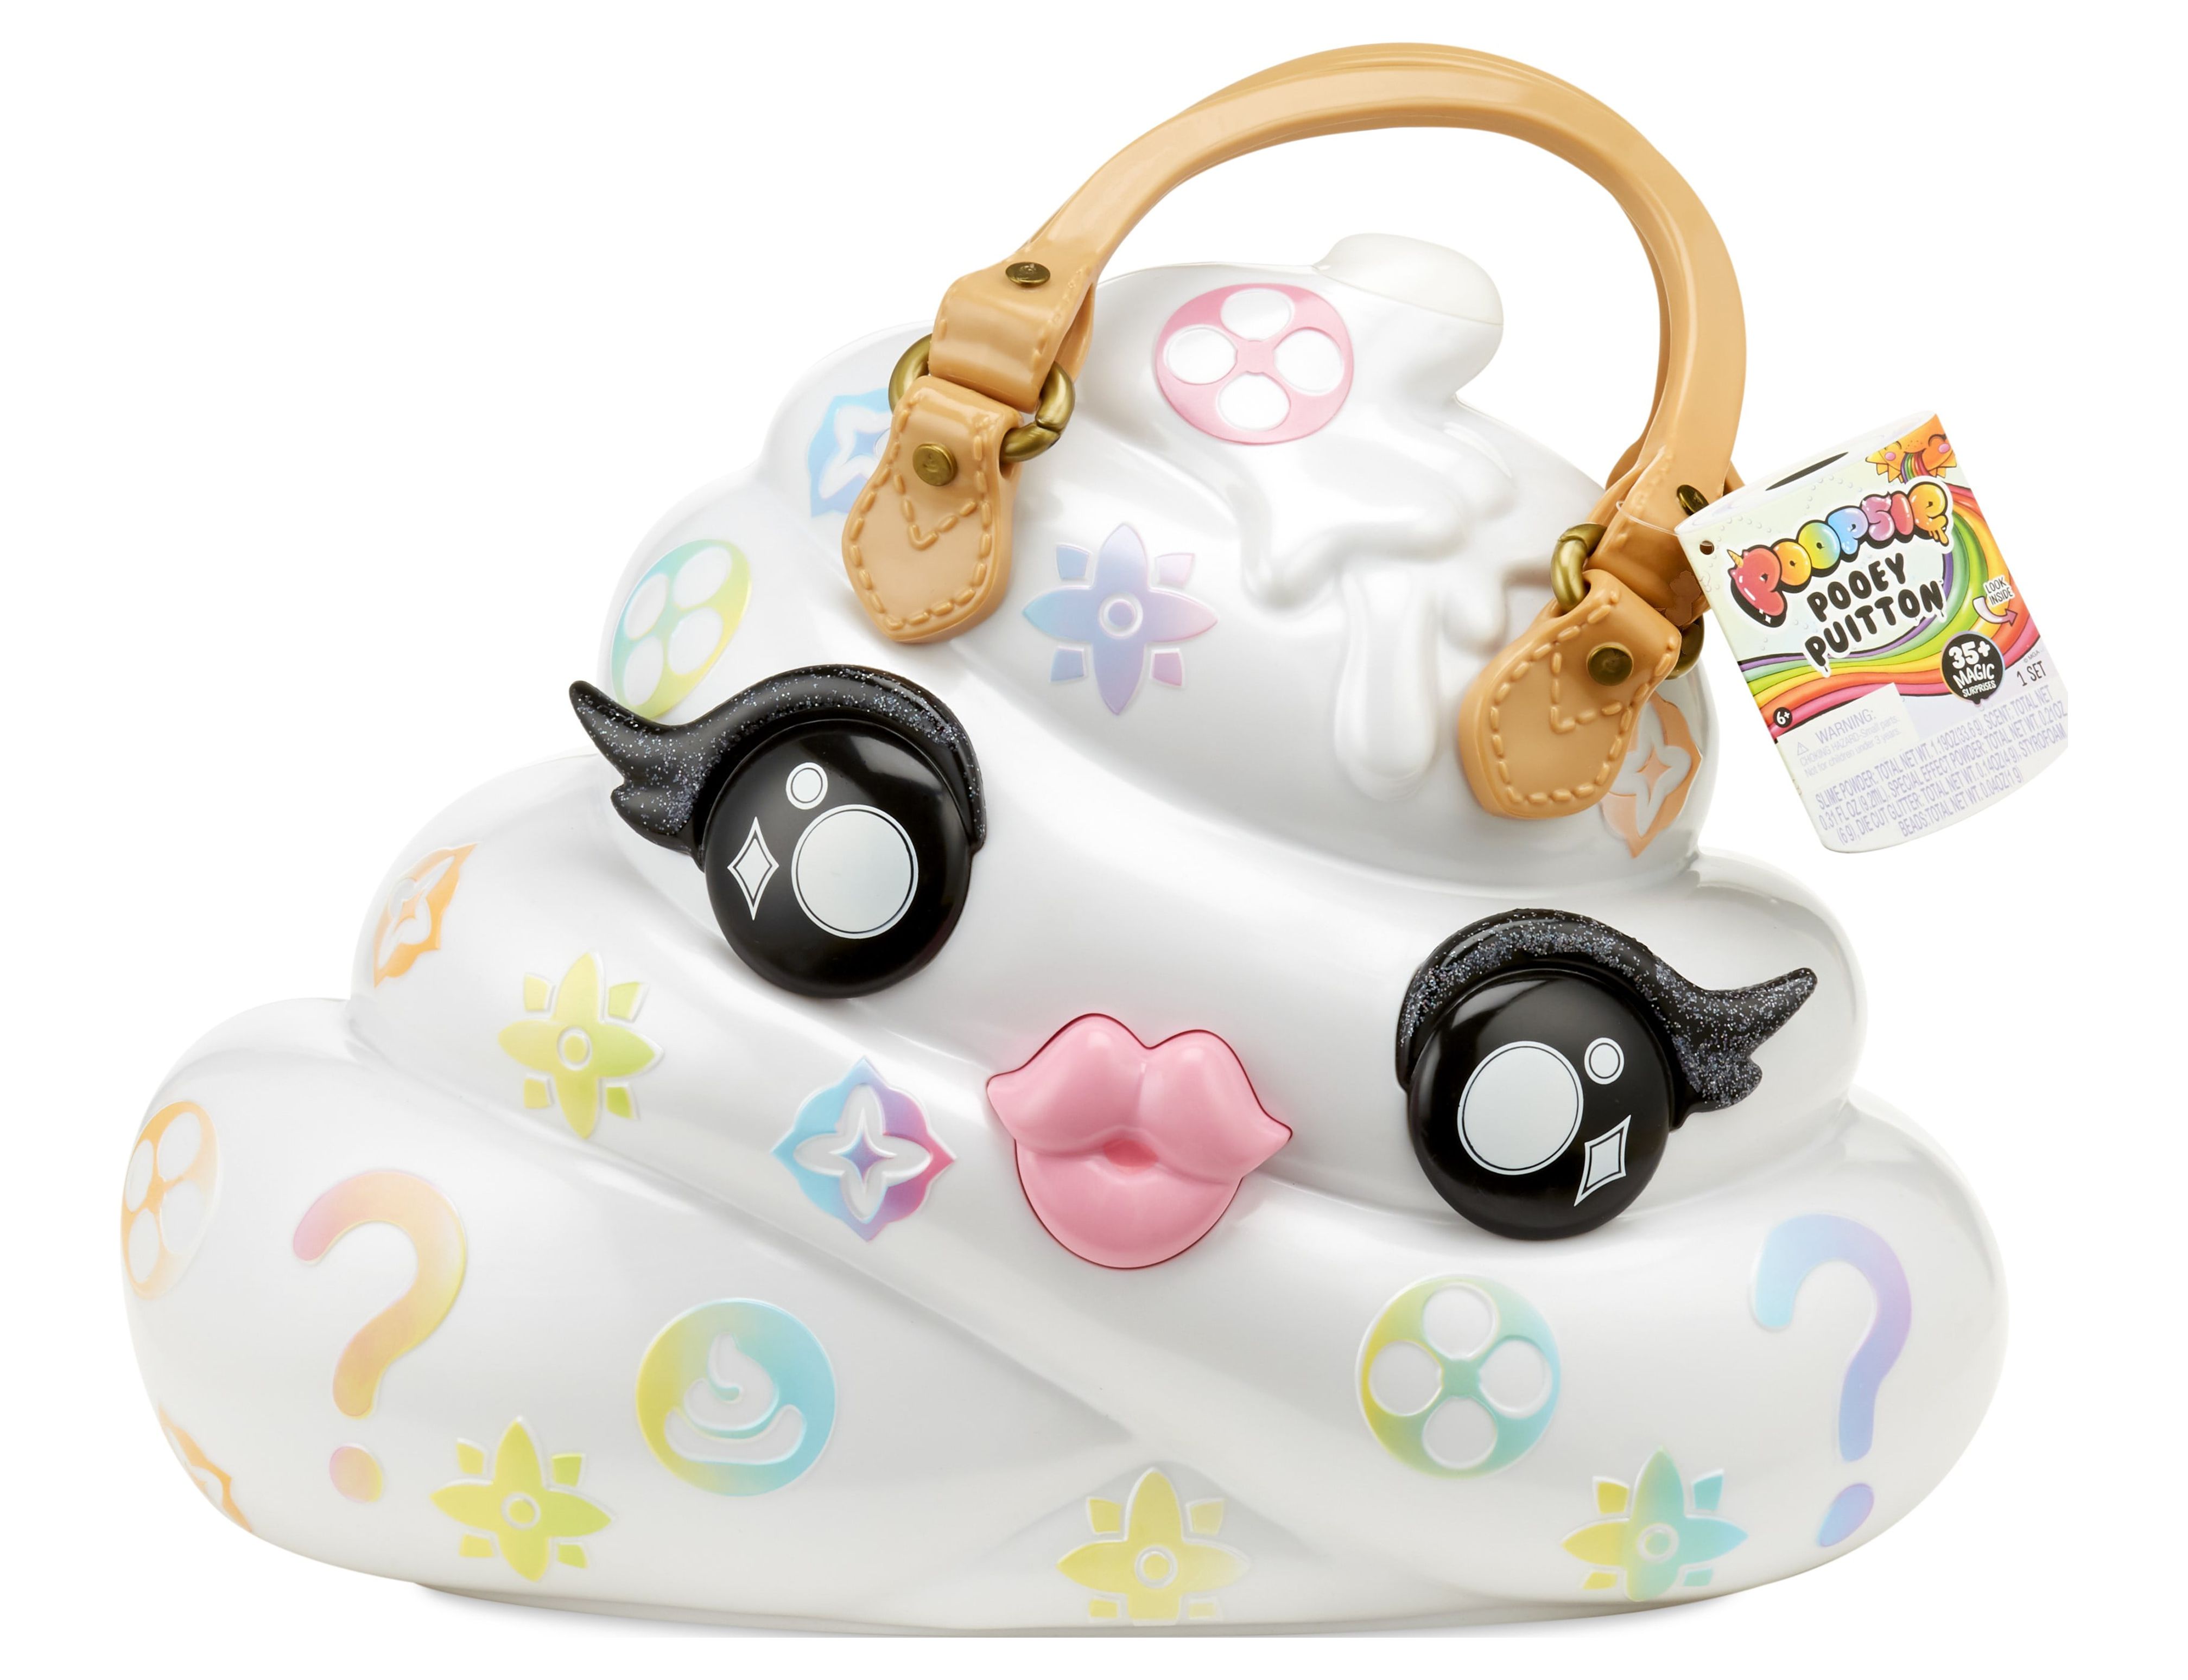 Poopsie Slime Surprise Pooey Puitton Purse with 35+ Magic Surprises - image 3 of 5